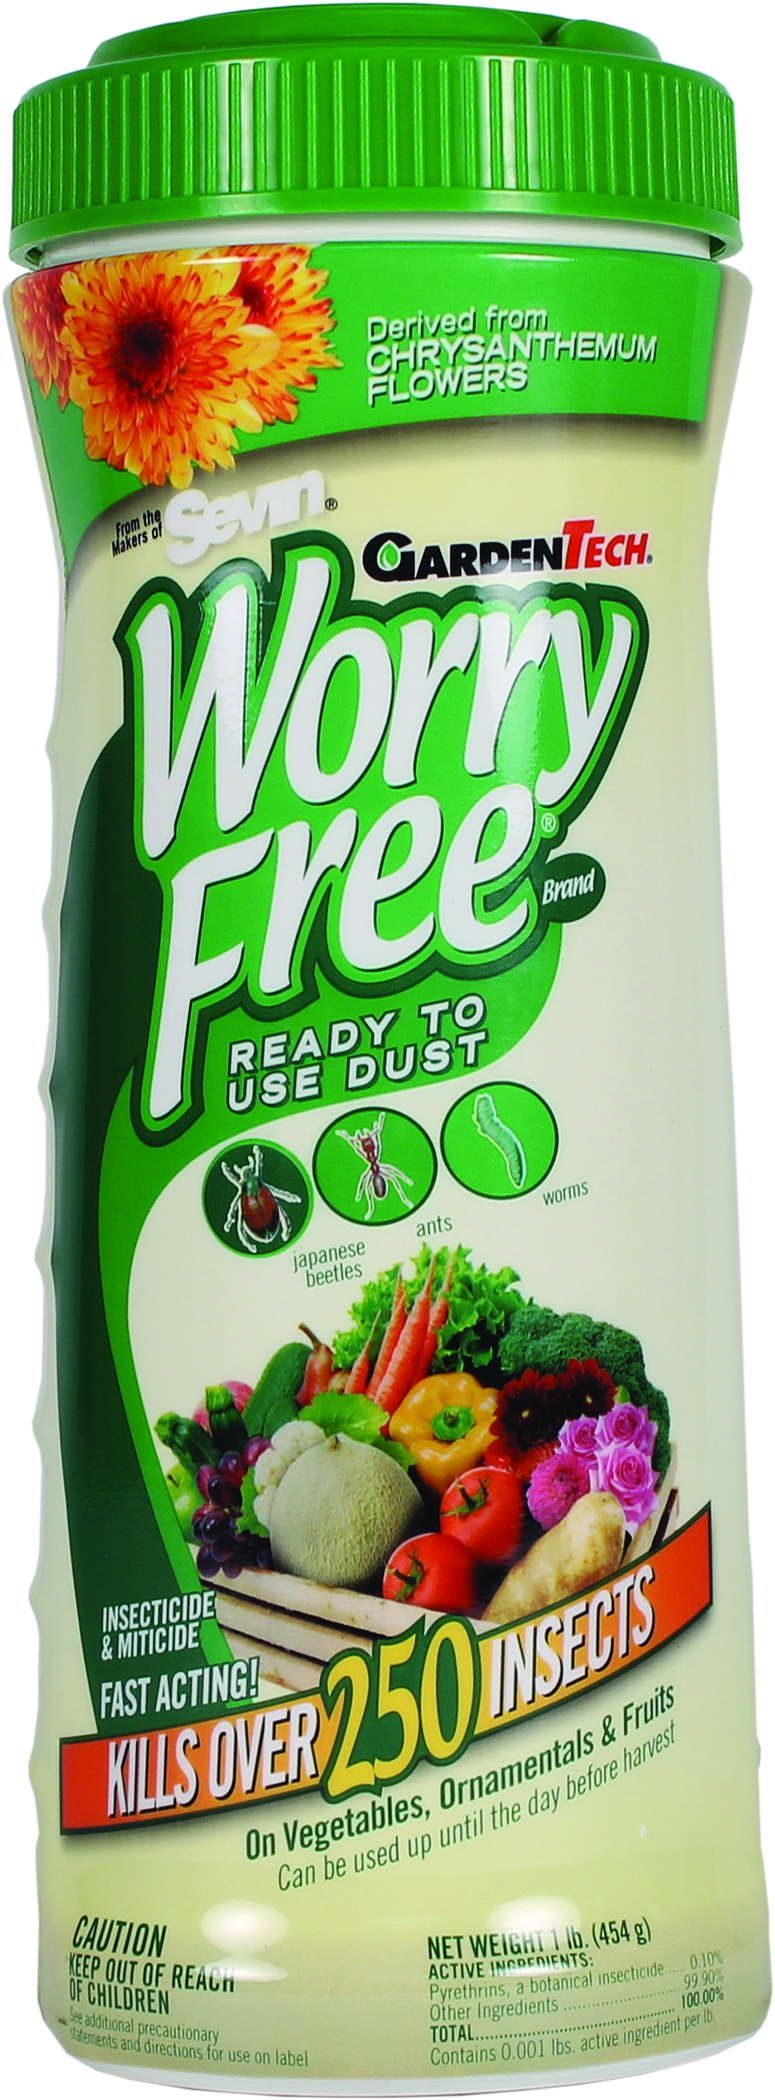 GARDENTECH WORRY FREE READY TO USE DUST